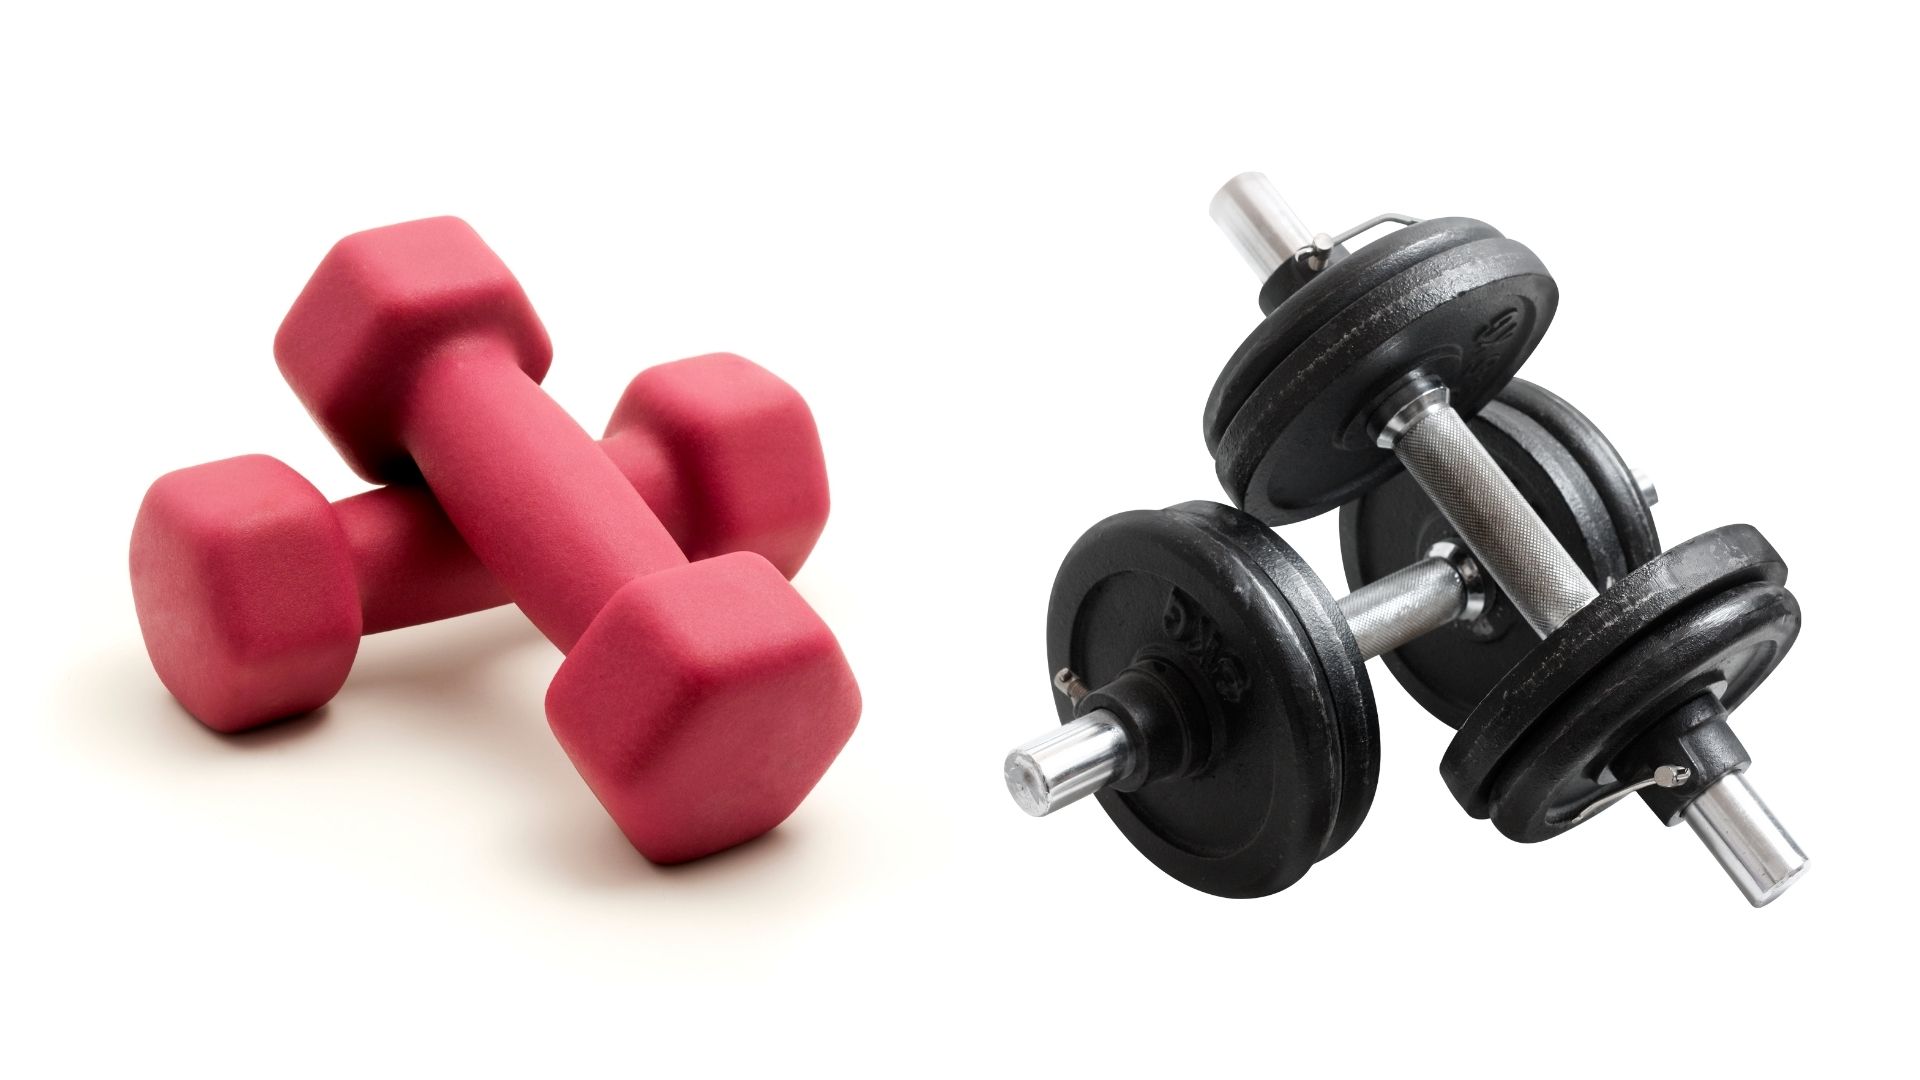 Dumbbells and Barbells on sale